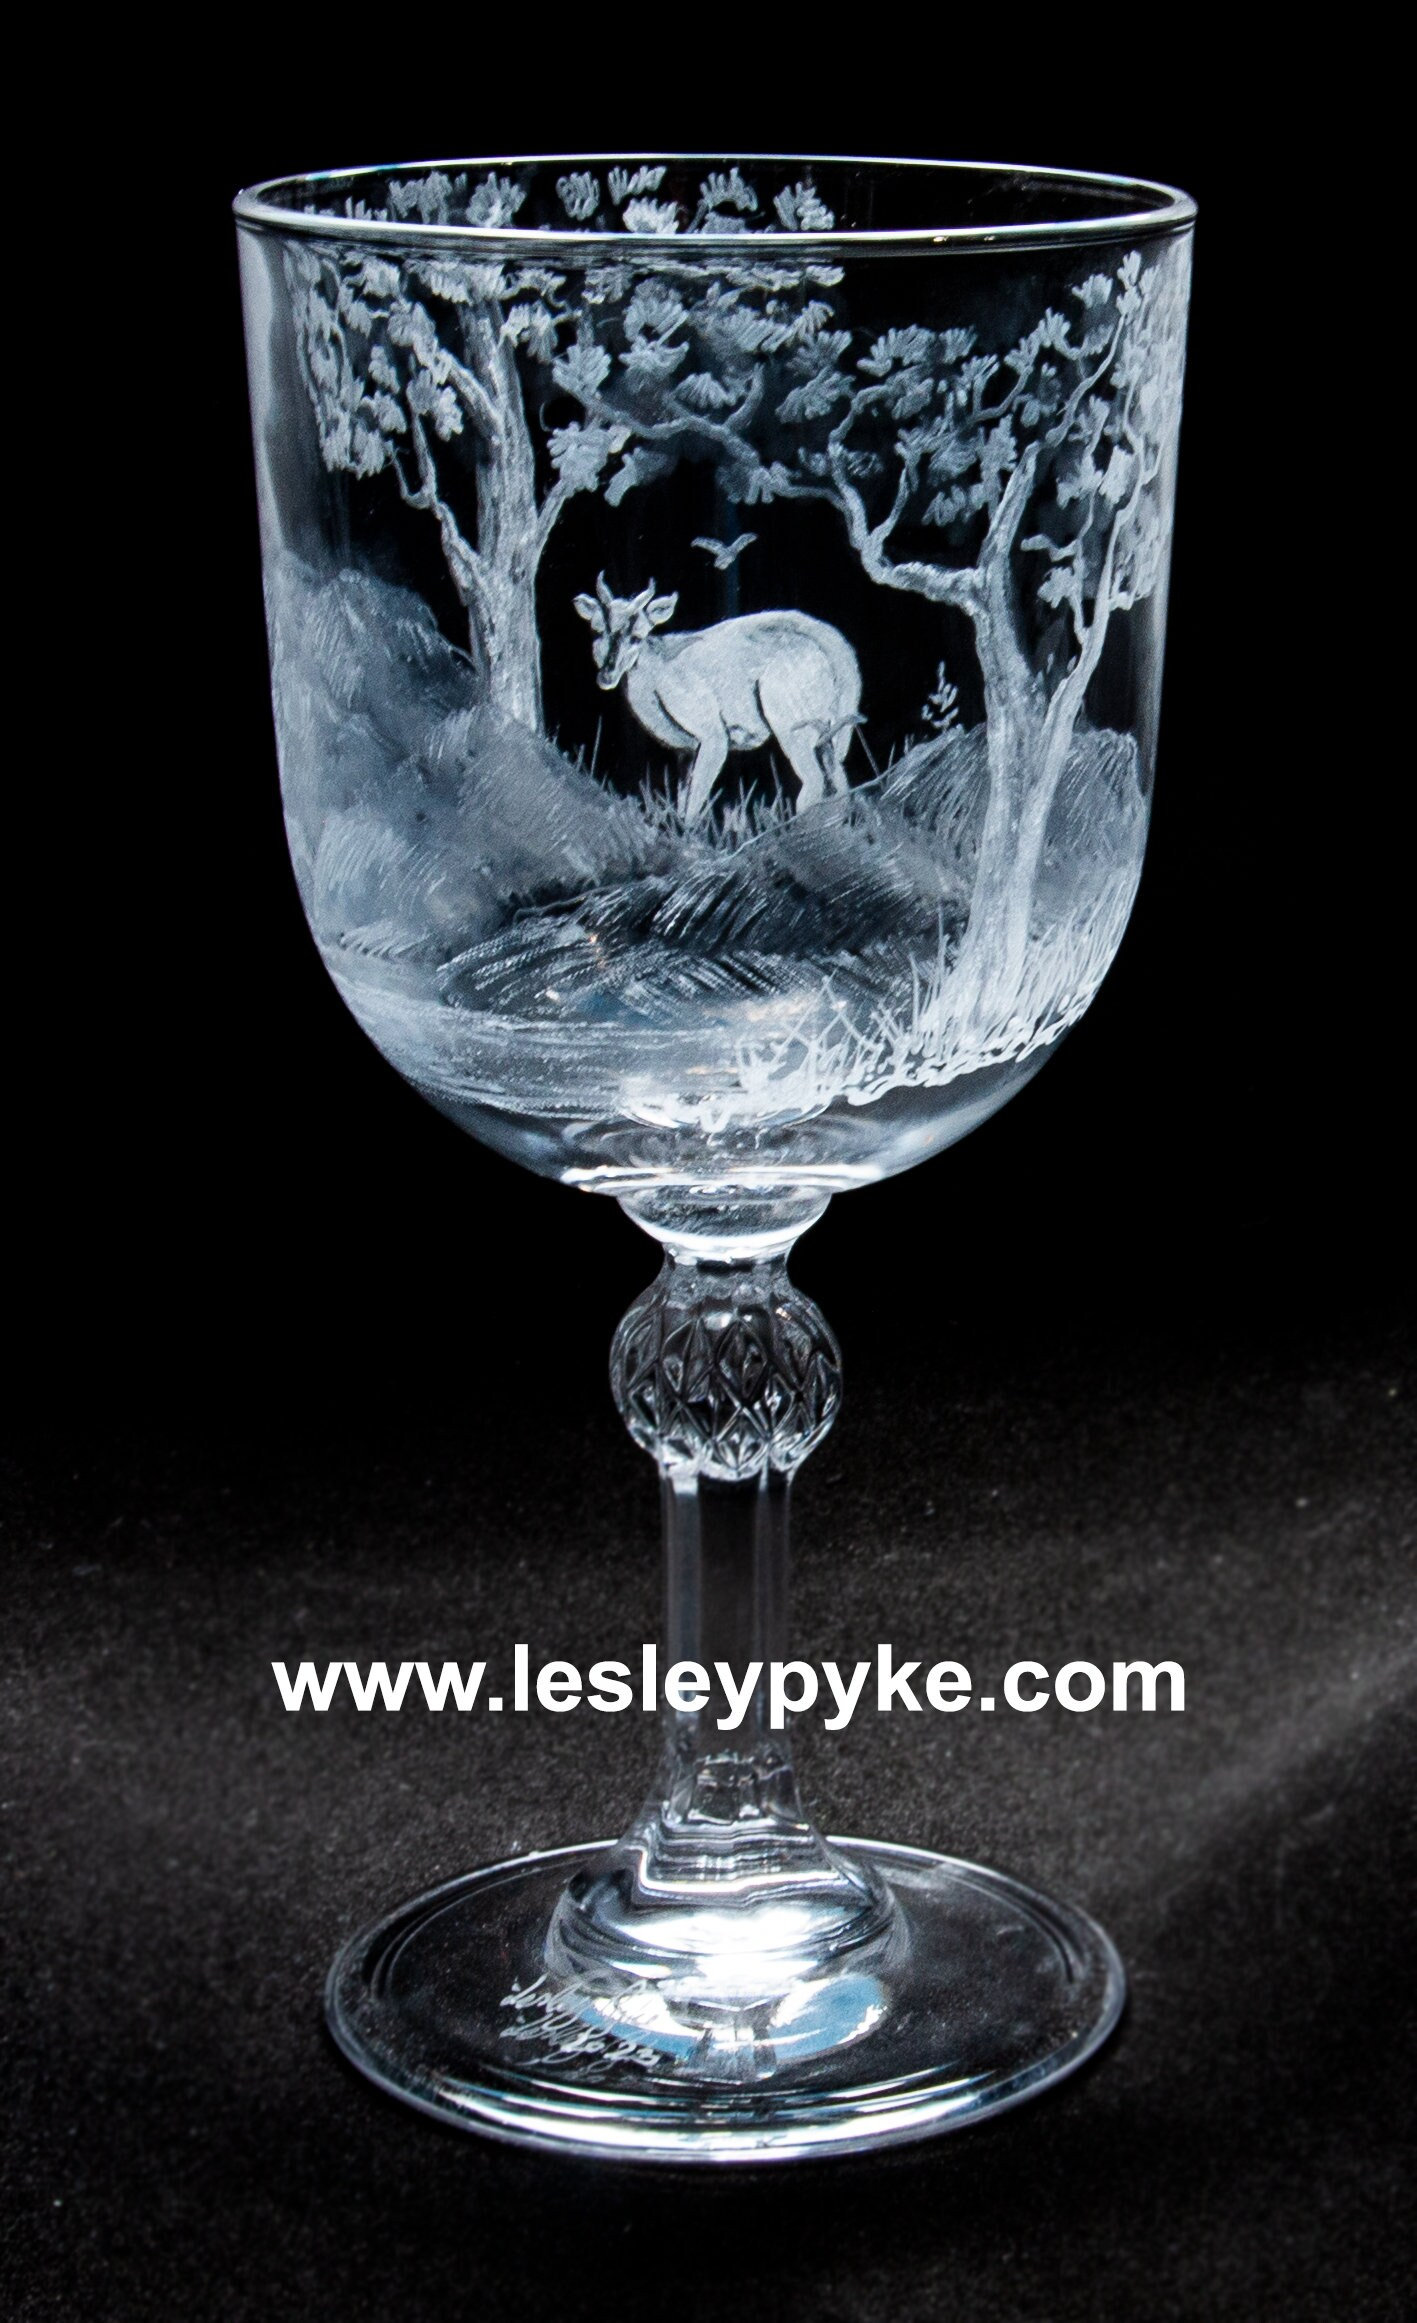 Lesley Pyke Glass Engraver, Products